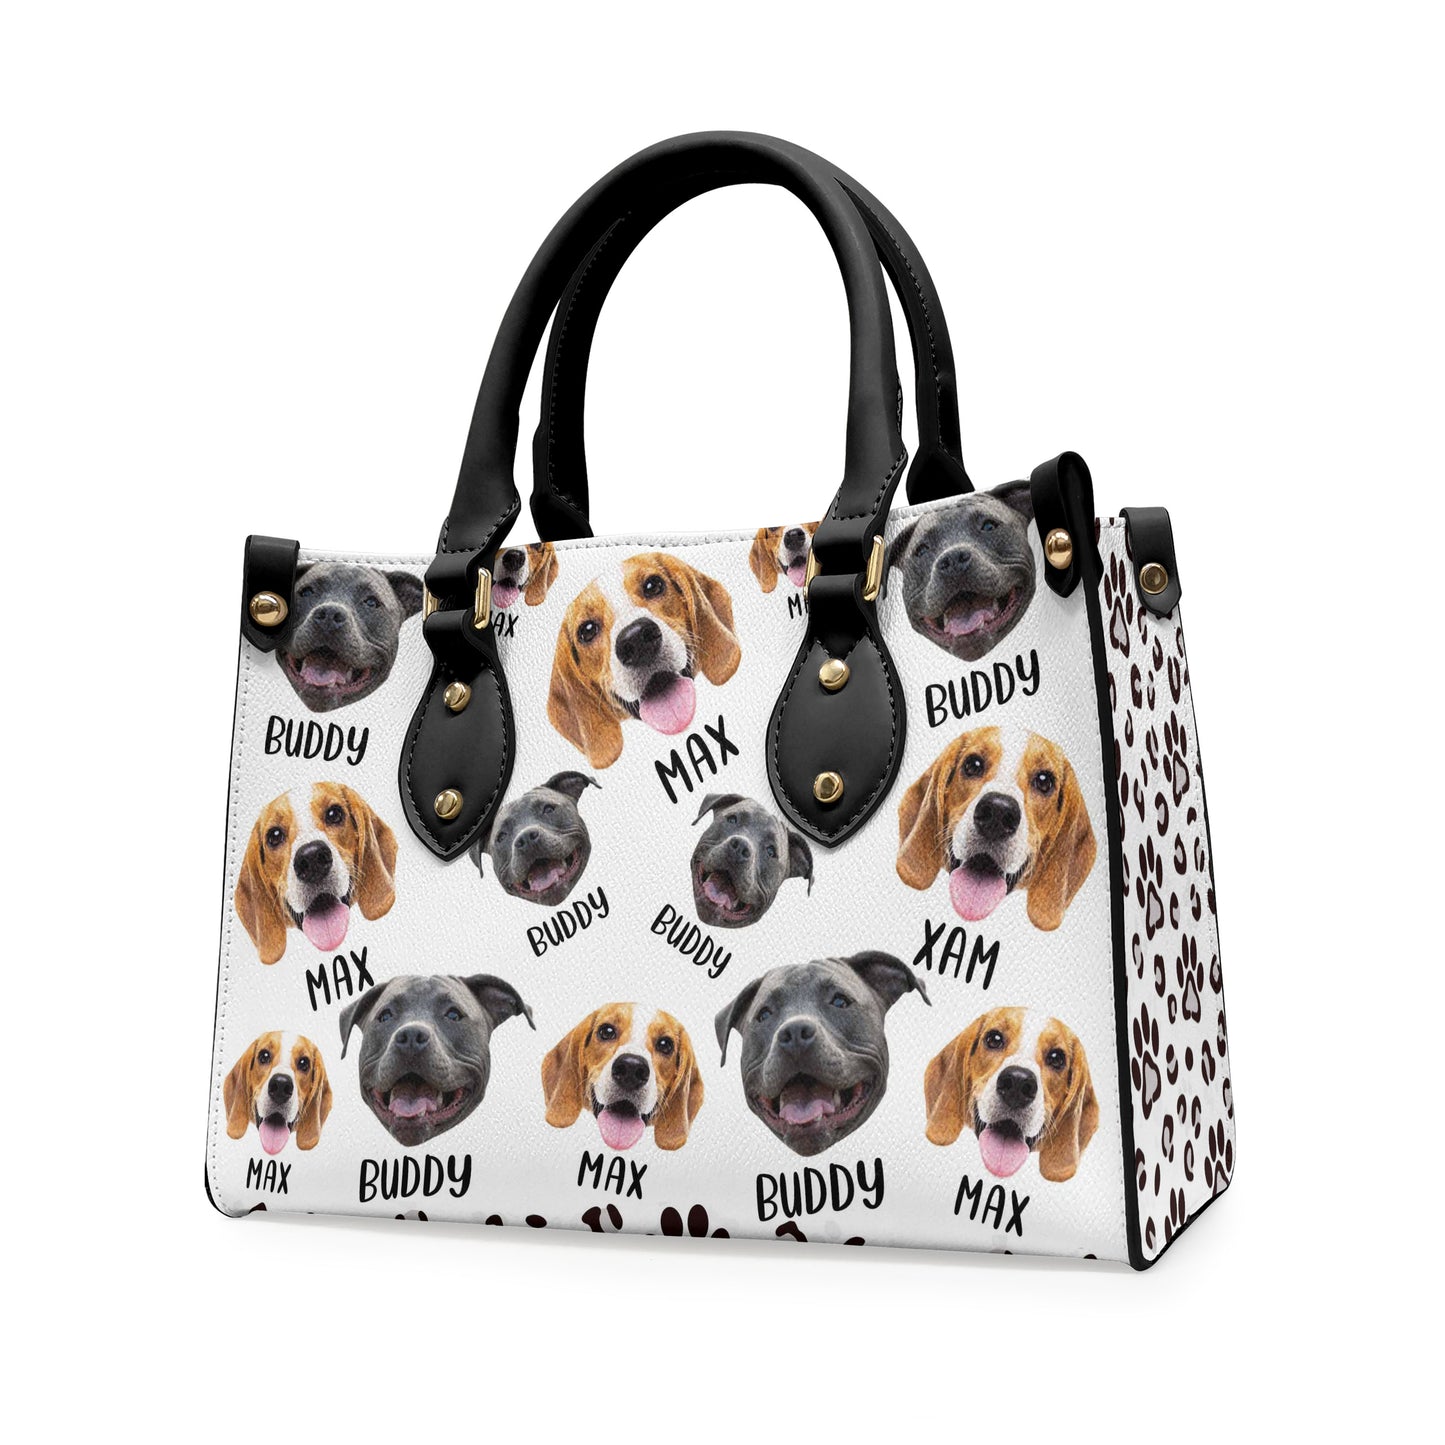 My Pet's Face - Personalized Photo Leather Bag